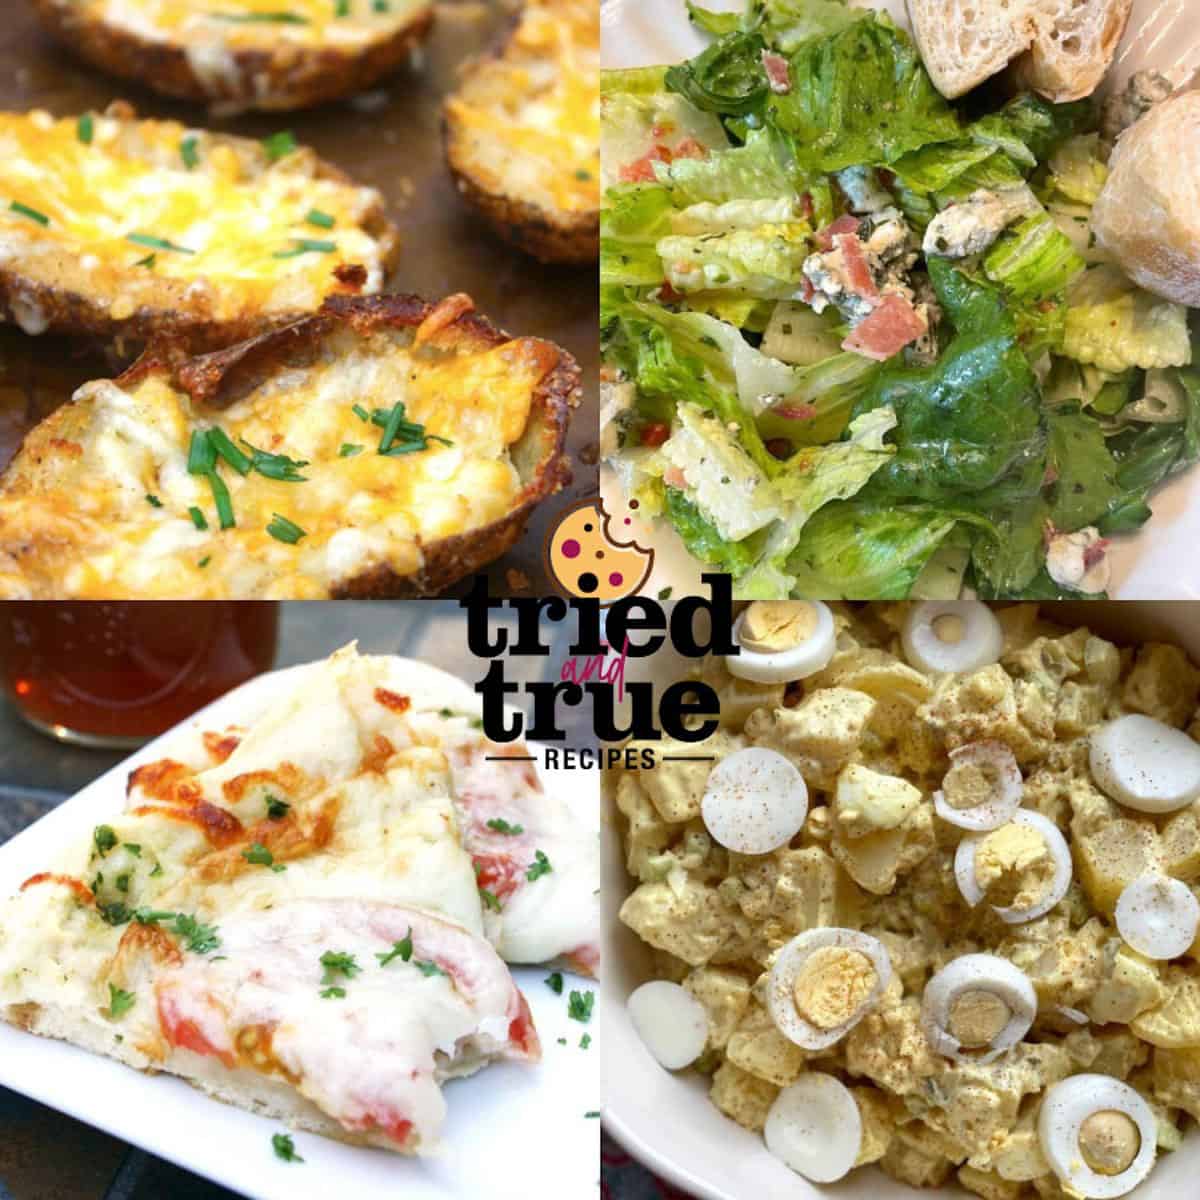 A collage of images showing appetizers for pizza - potato skins, green salad, potato salad, and white pizza.